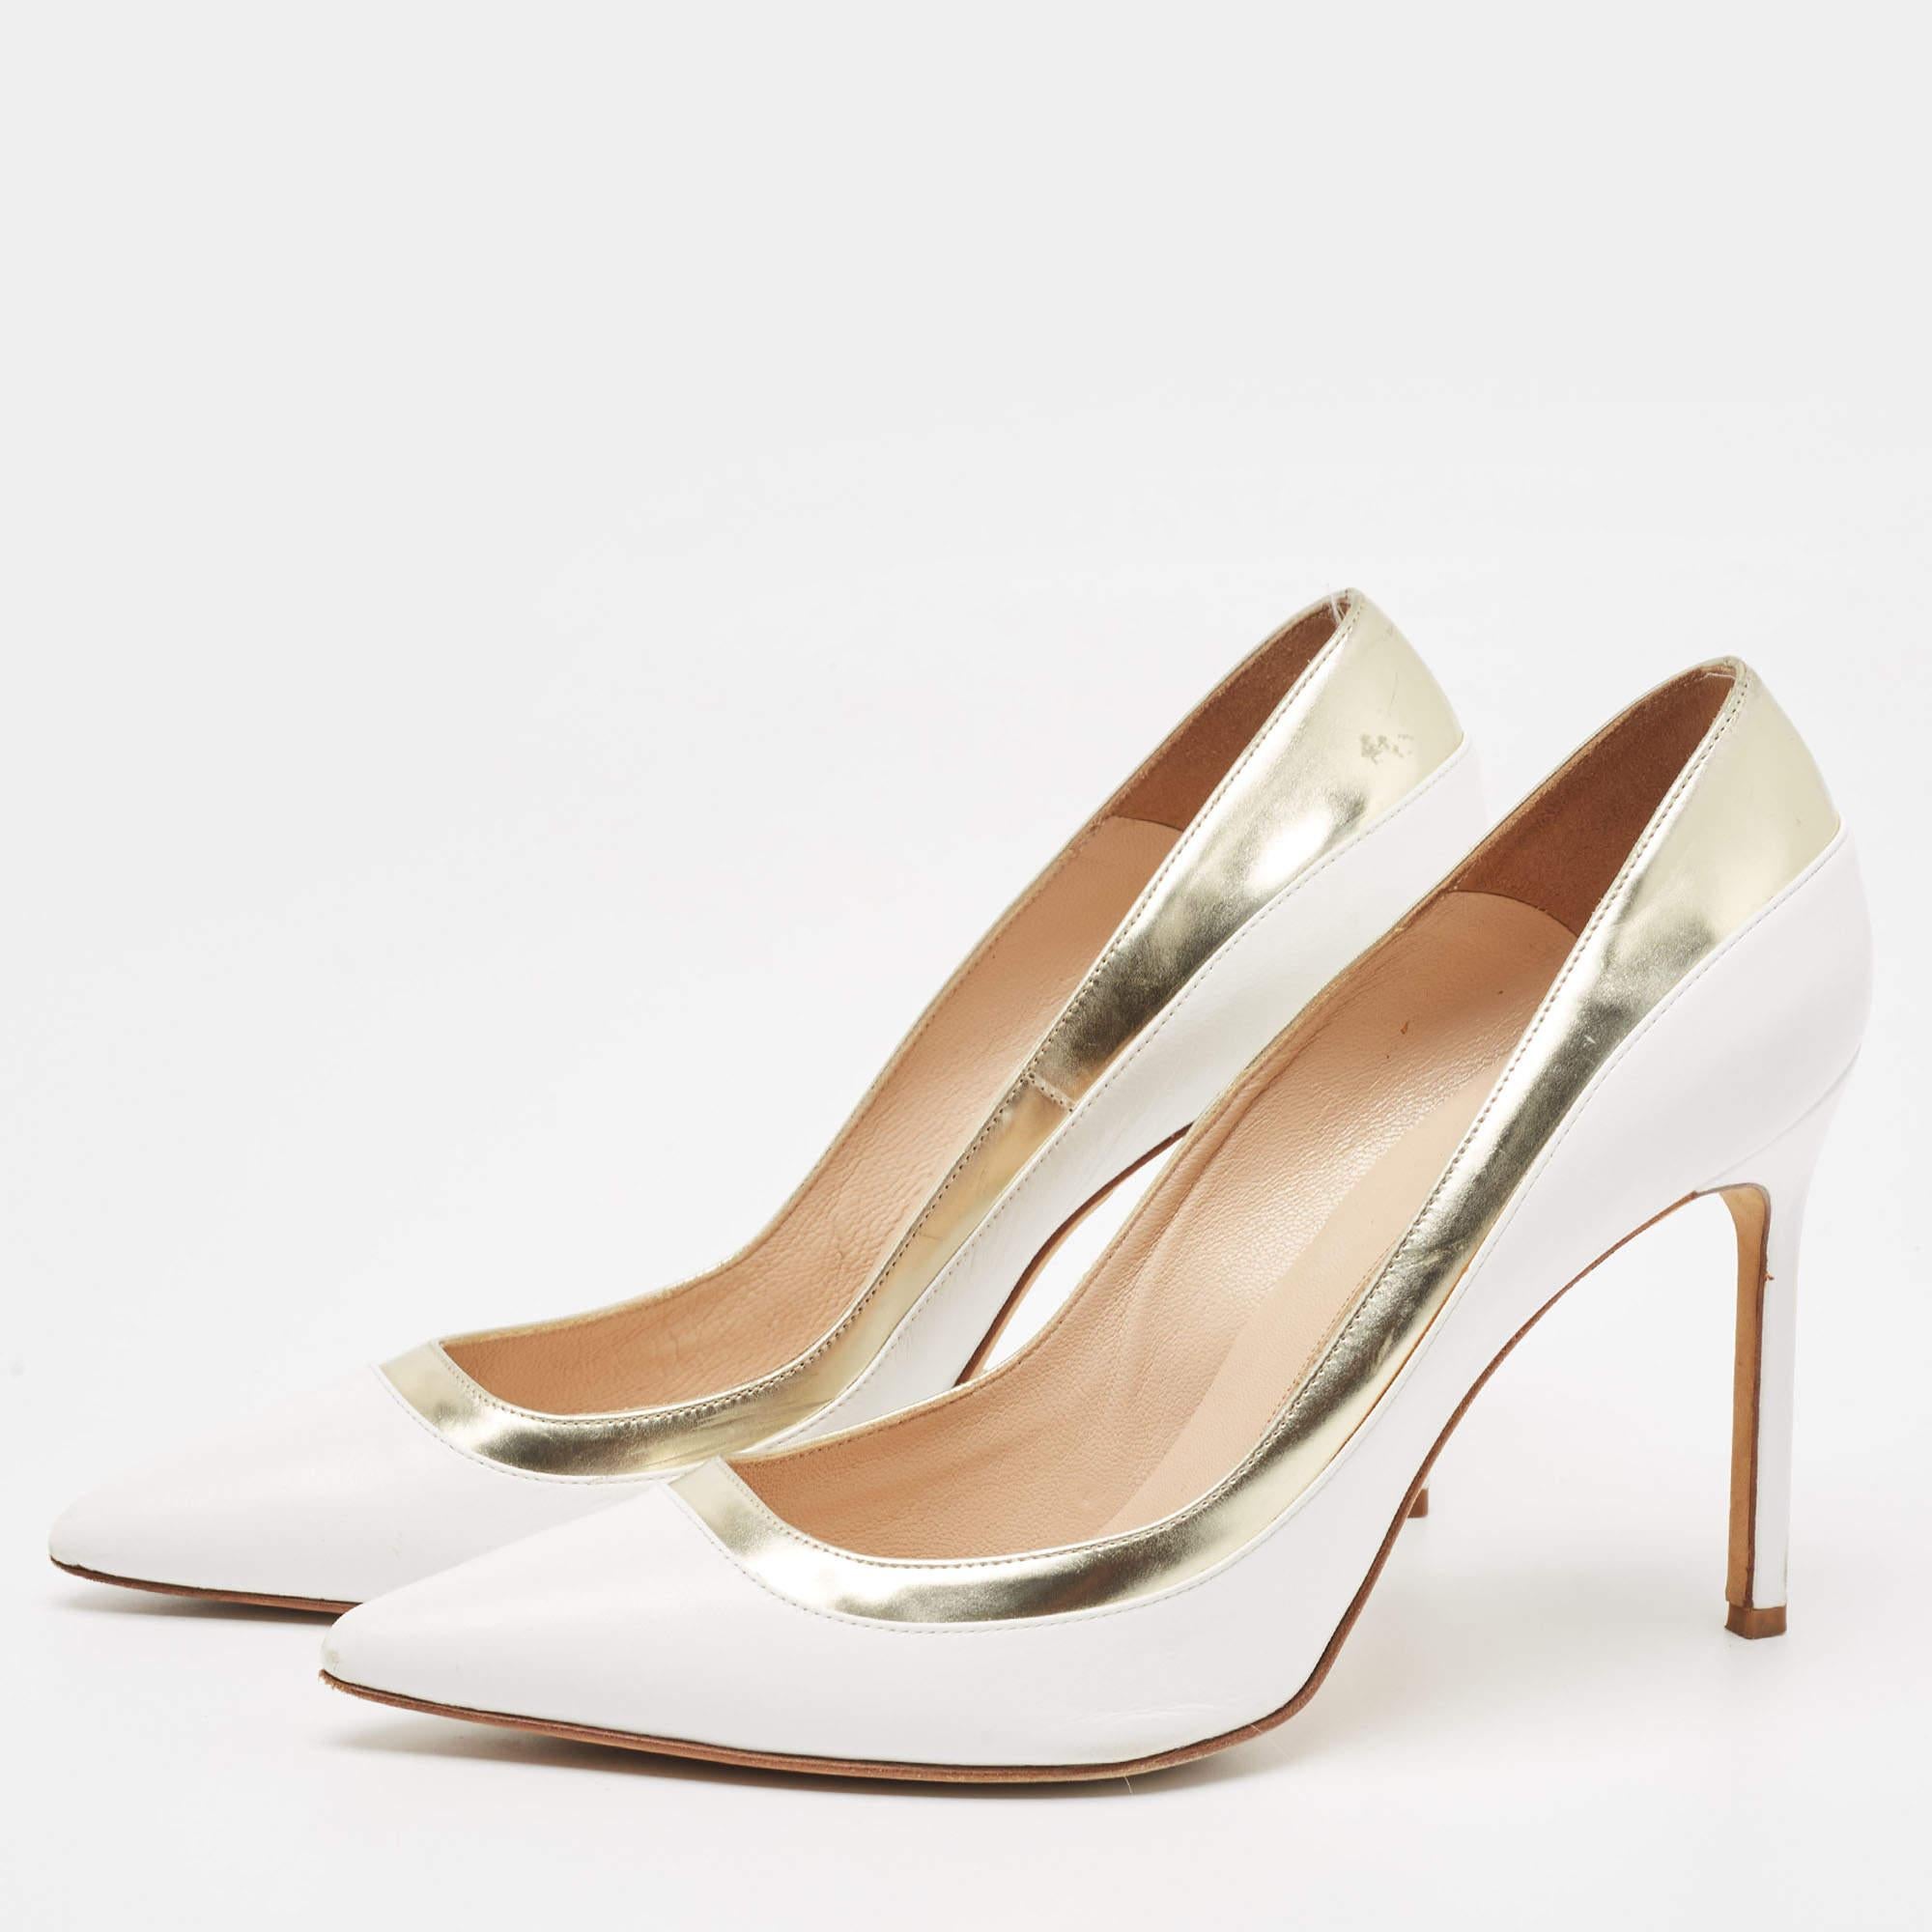 Manolo Blahnik White/Gold Leather Pointed Toe Pumps Size 40 2